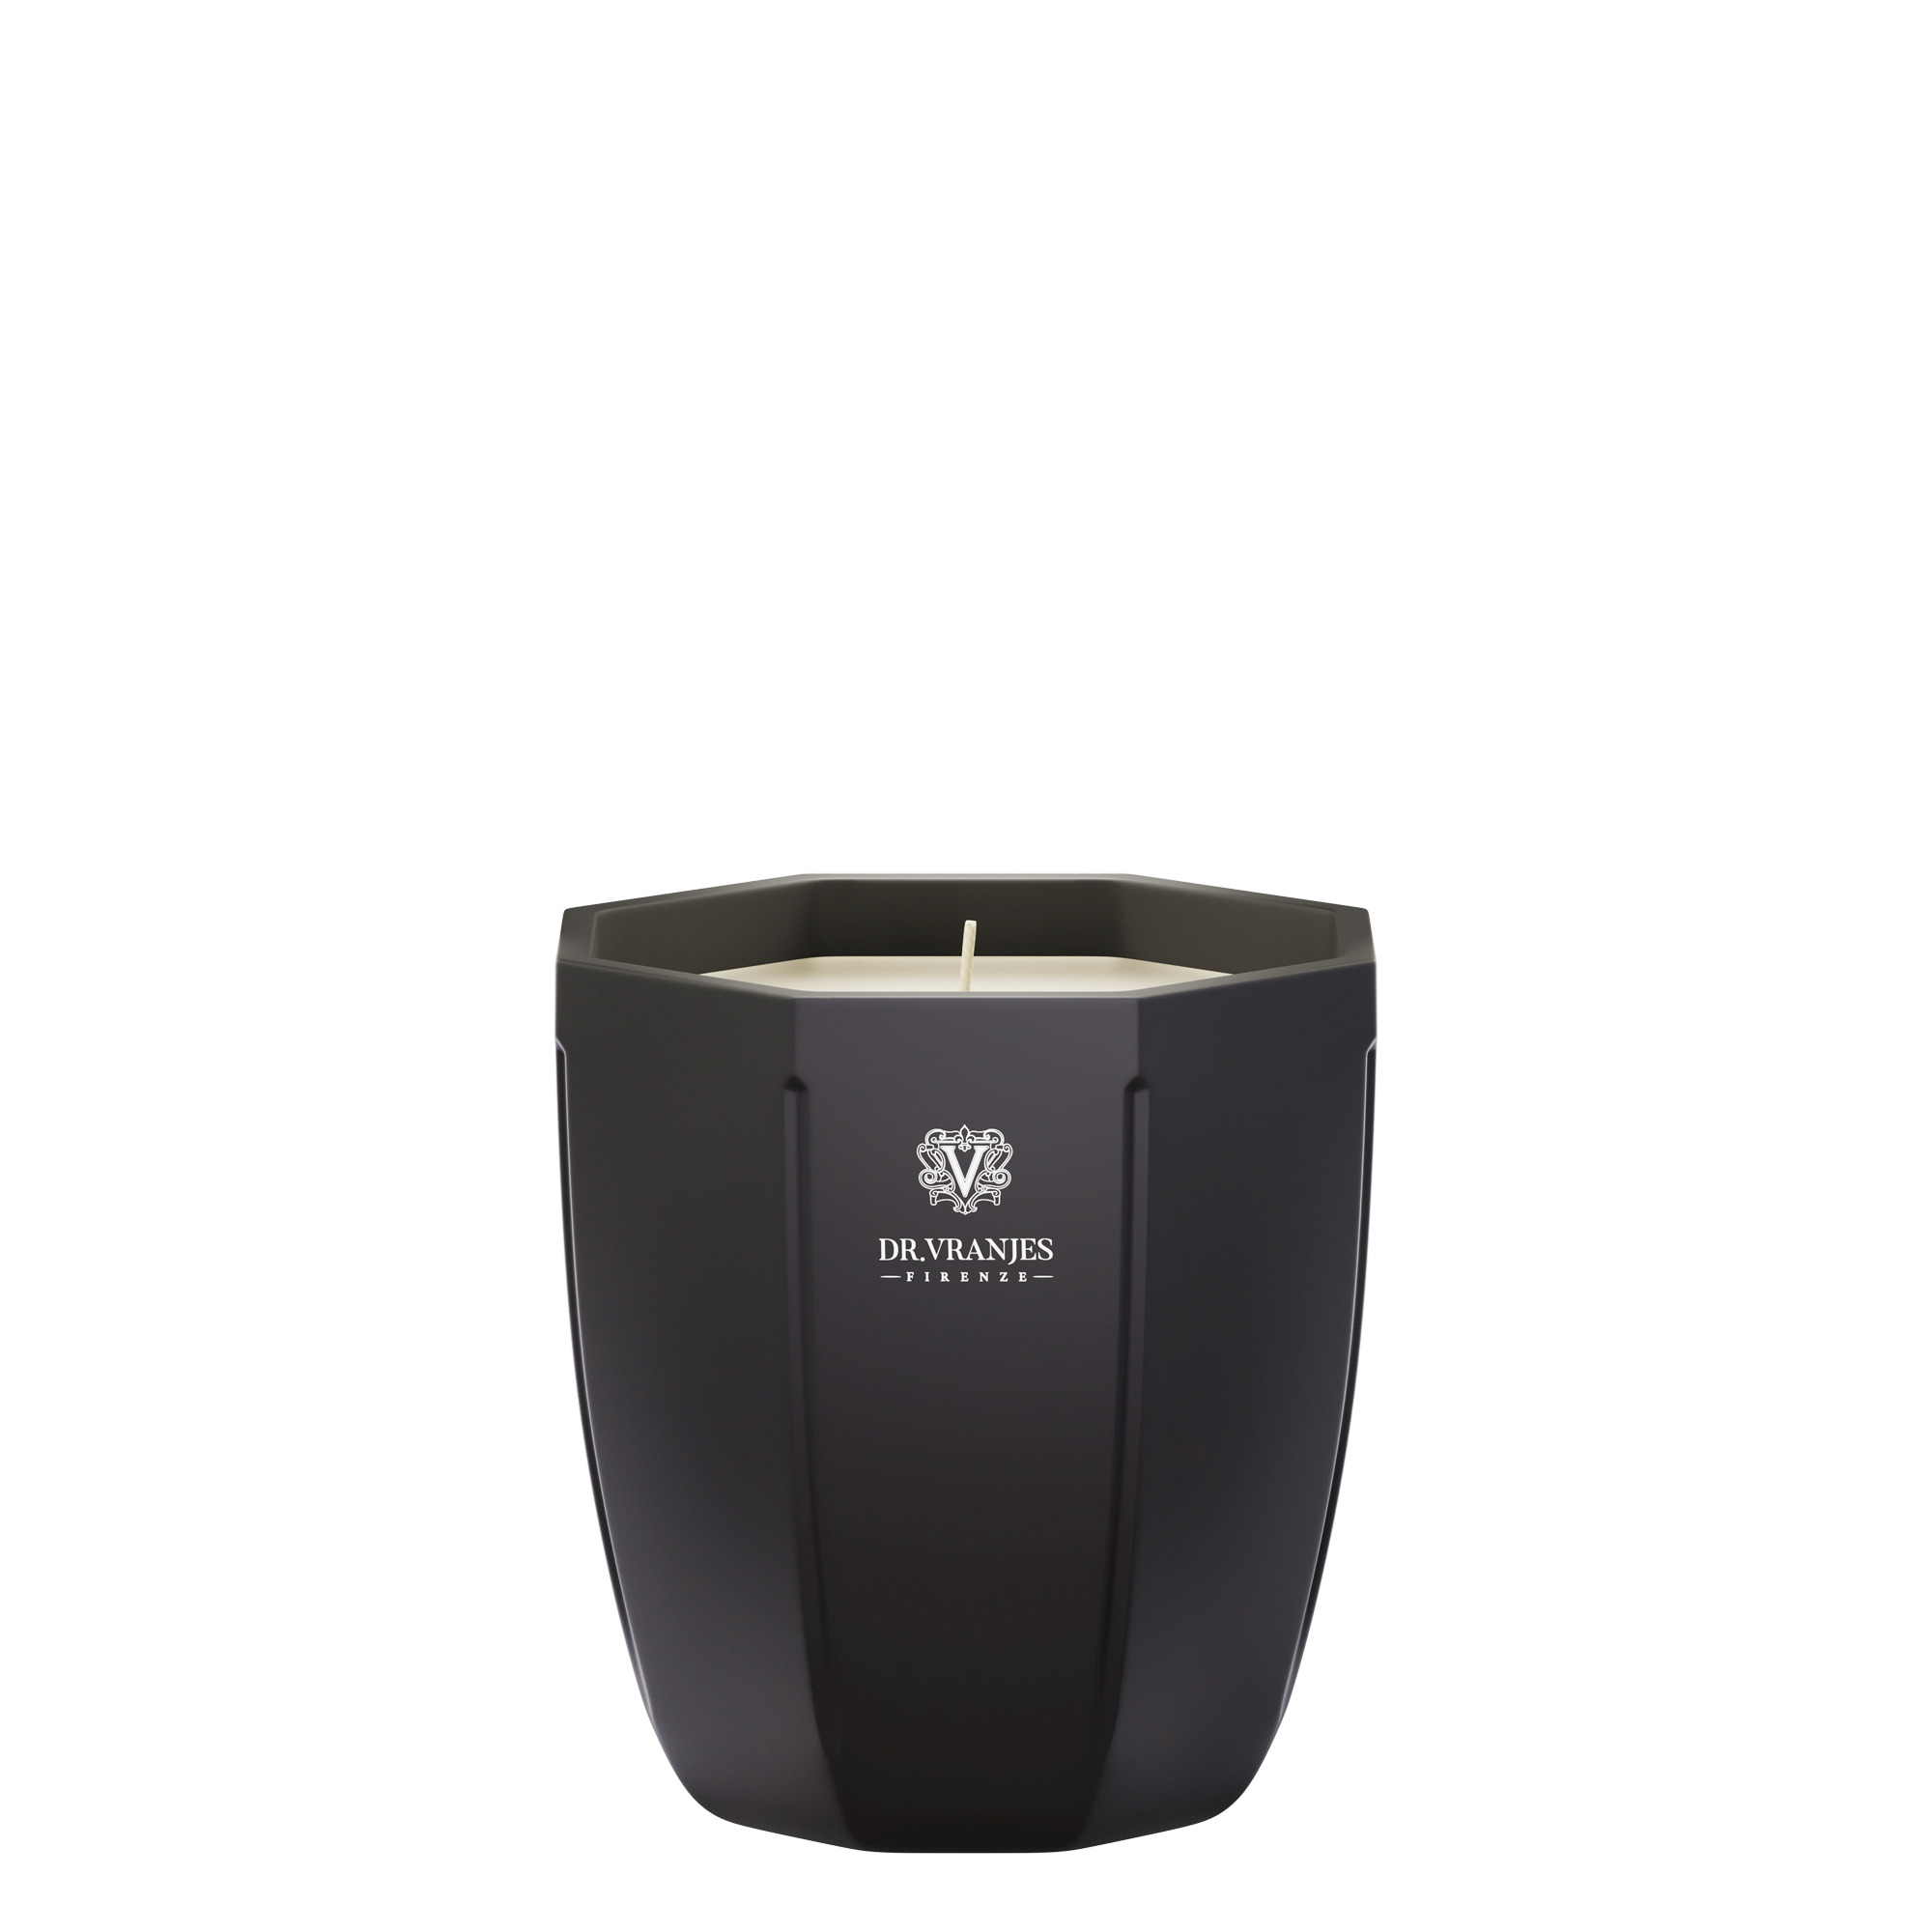 Rosa Tabacco Candle